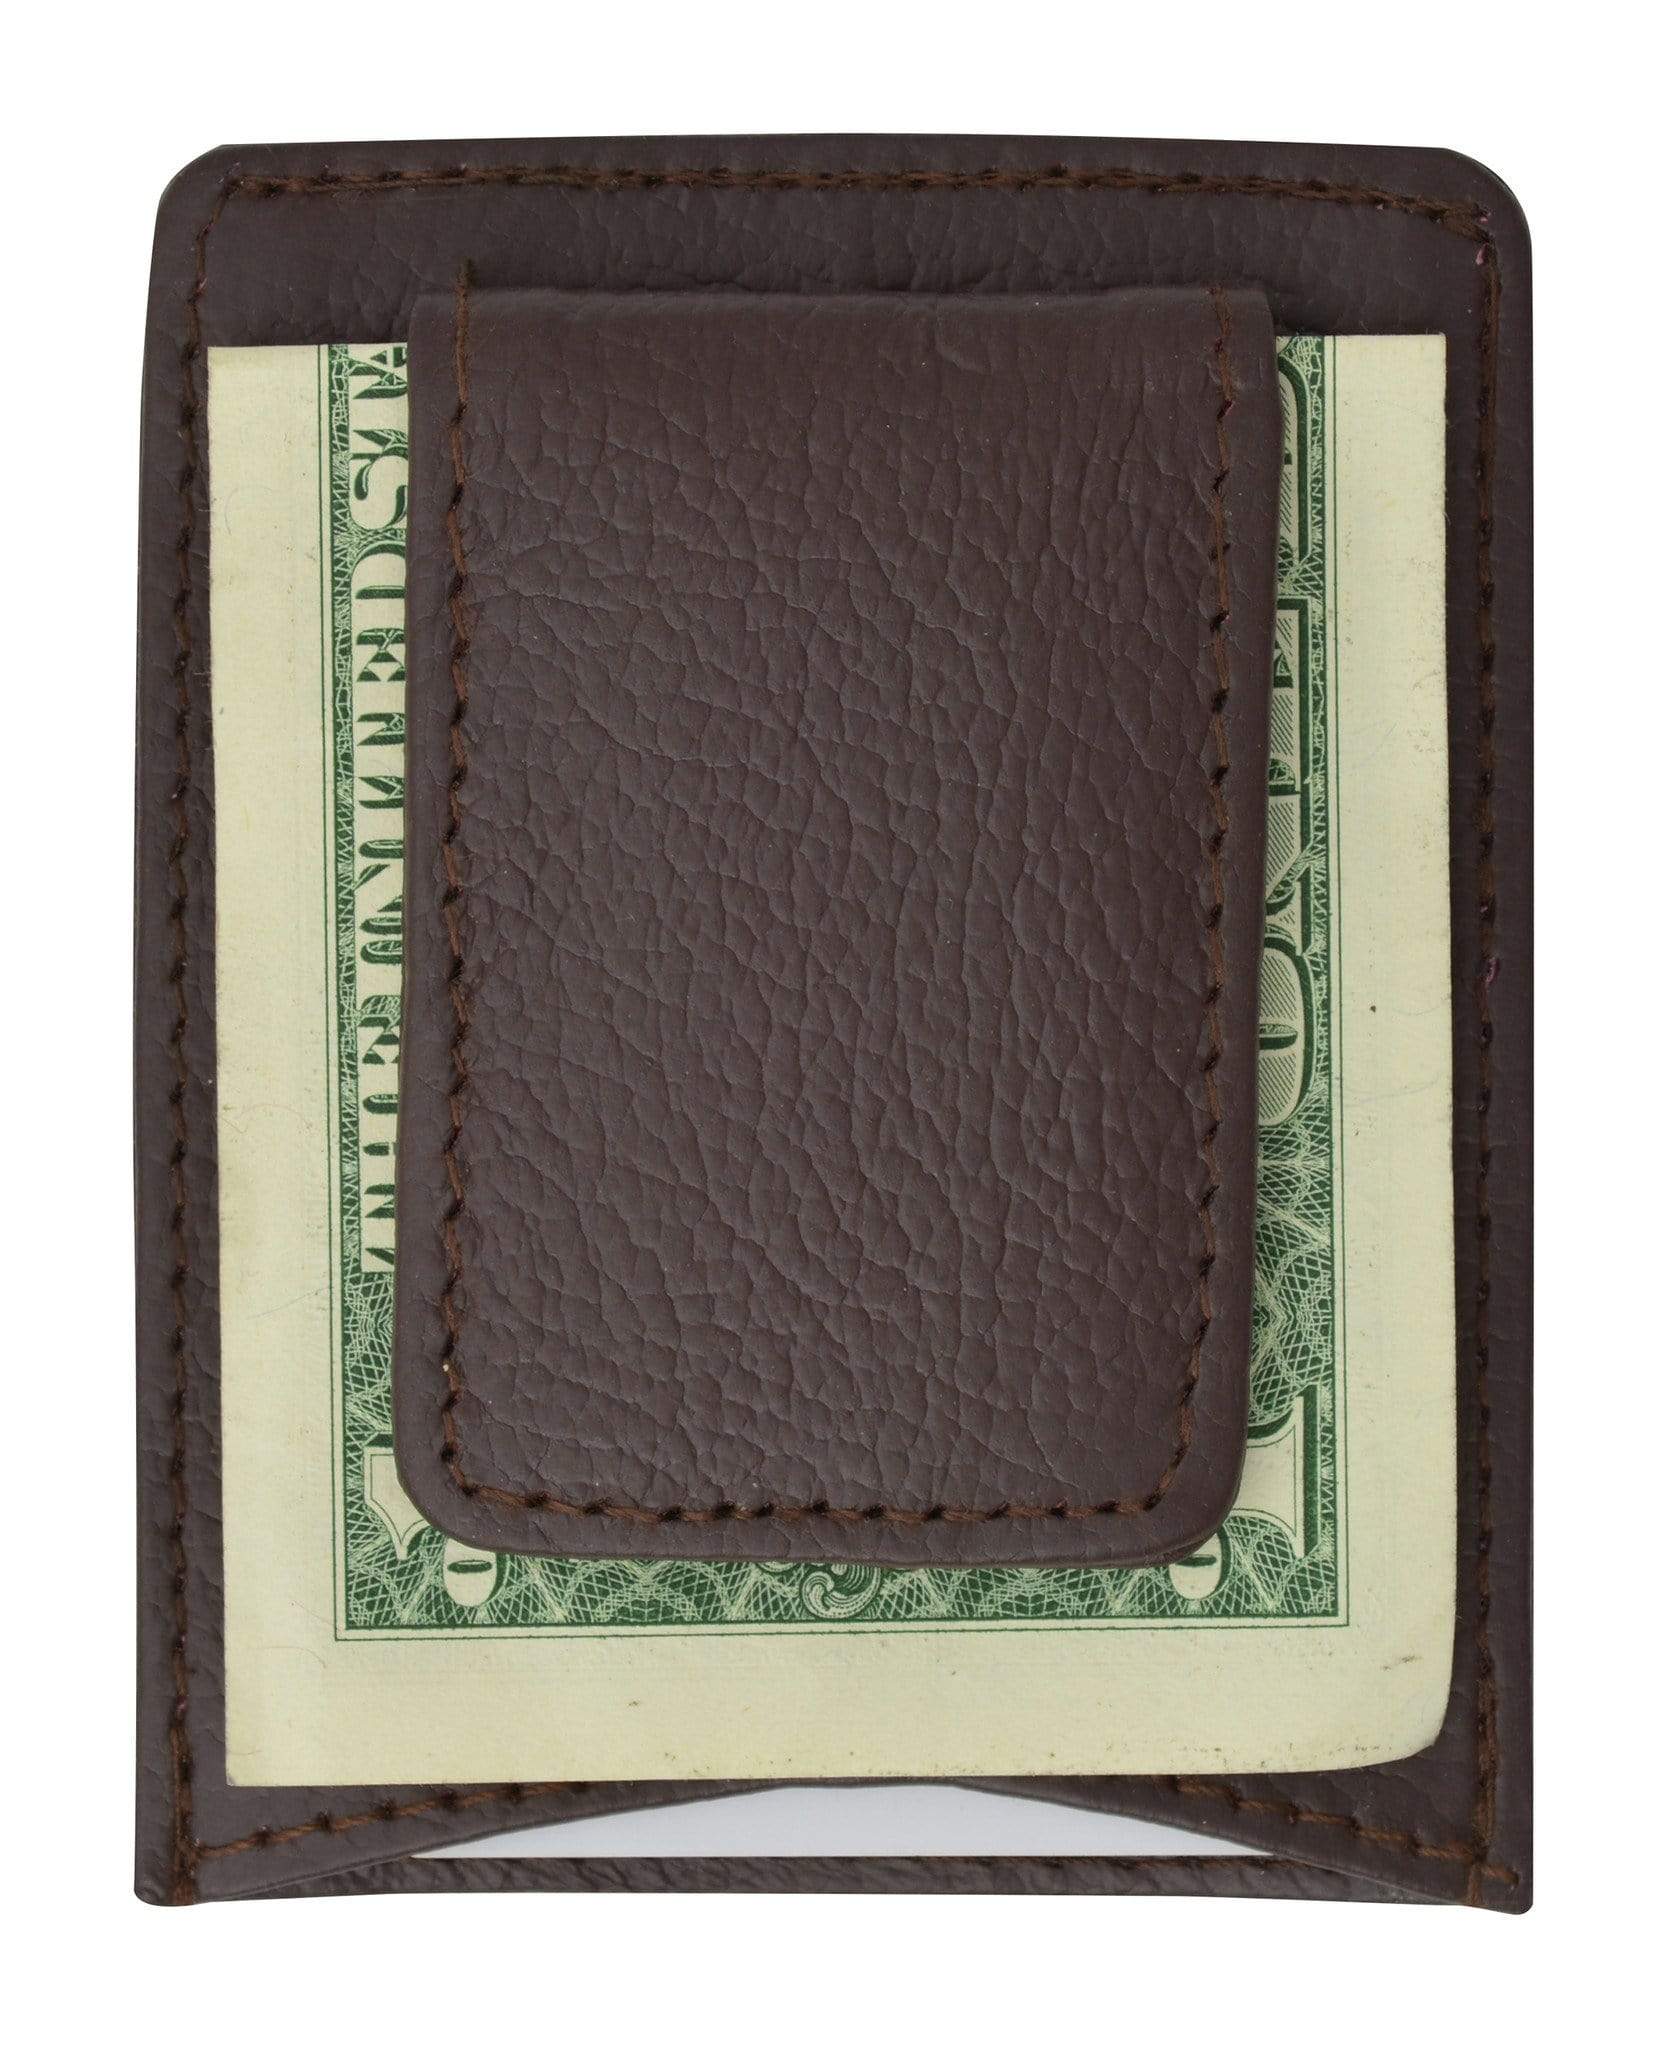 Boardroom Leather money clip Wallet with Card Holder Slots